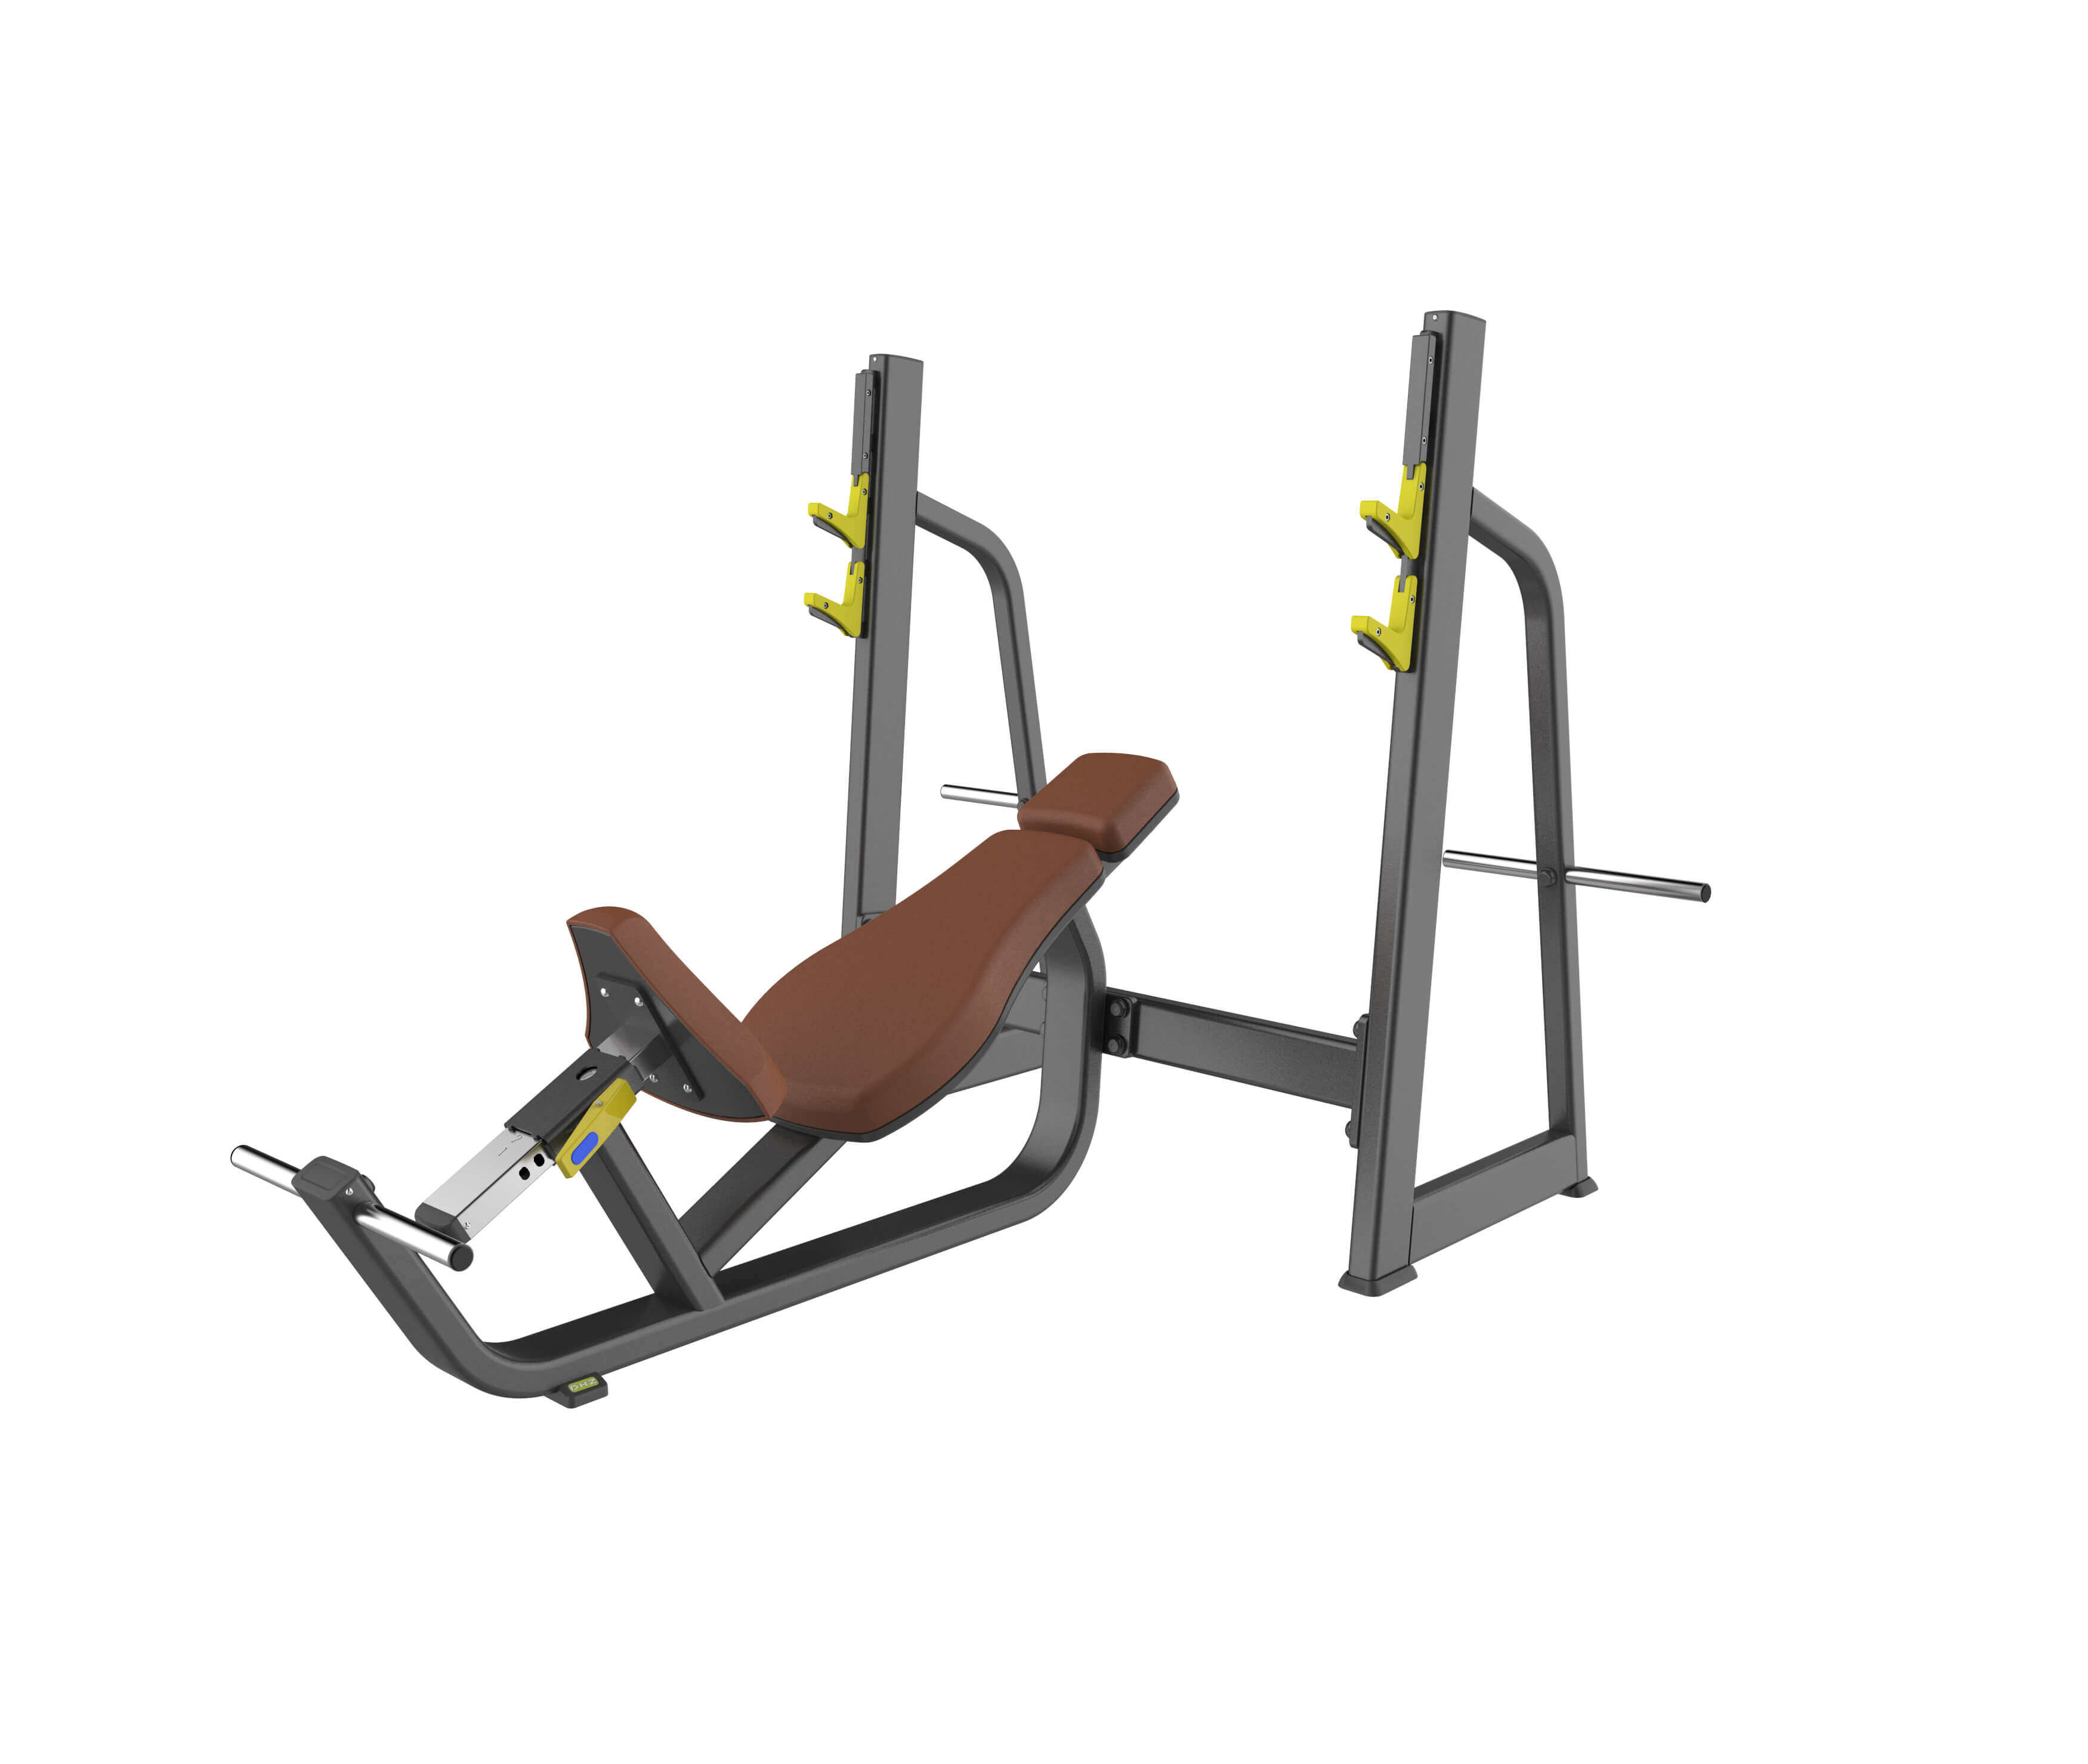 Supk-1531 Olympic Incline Bench